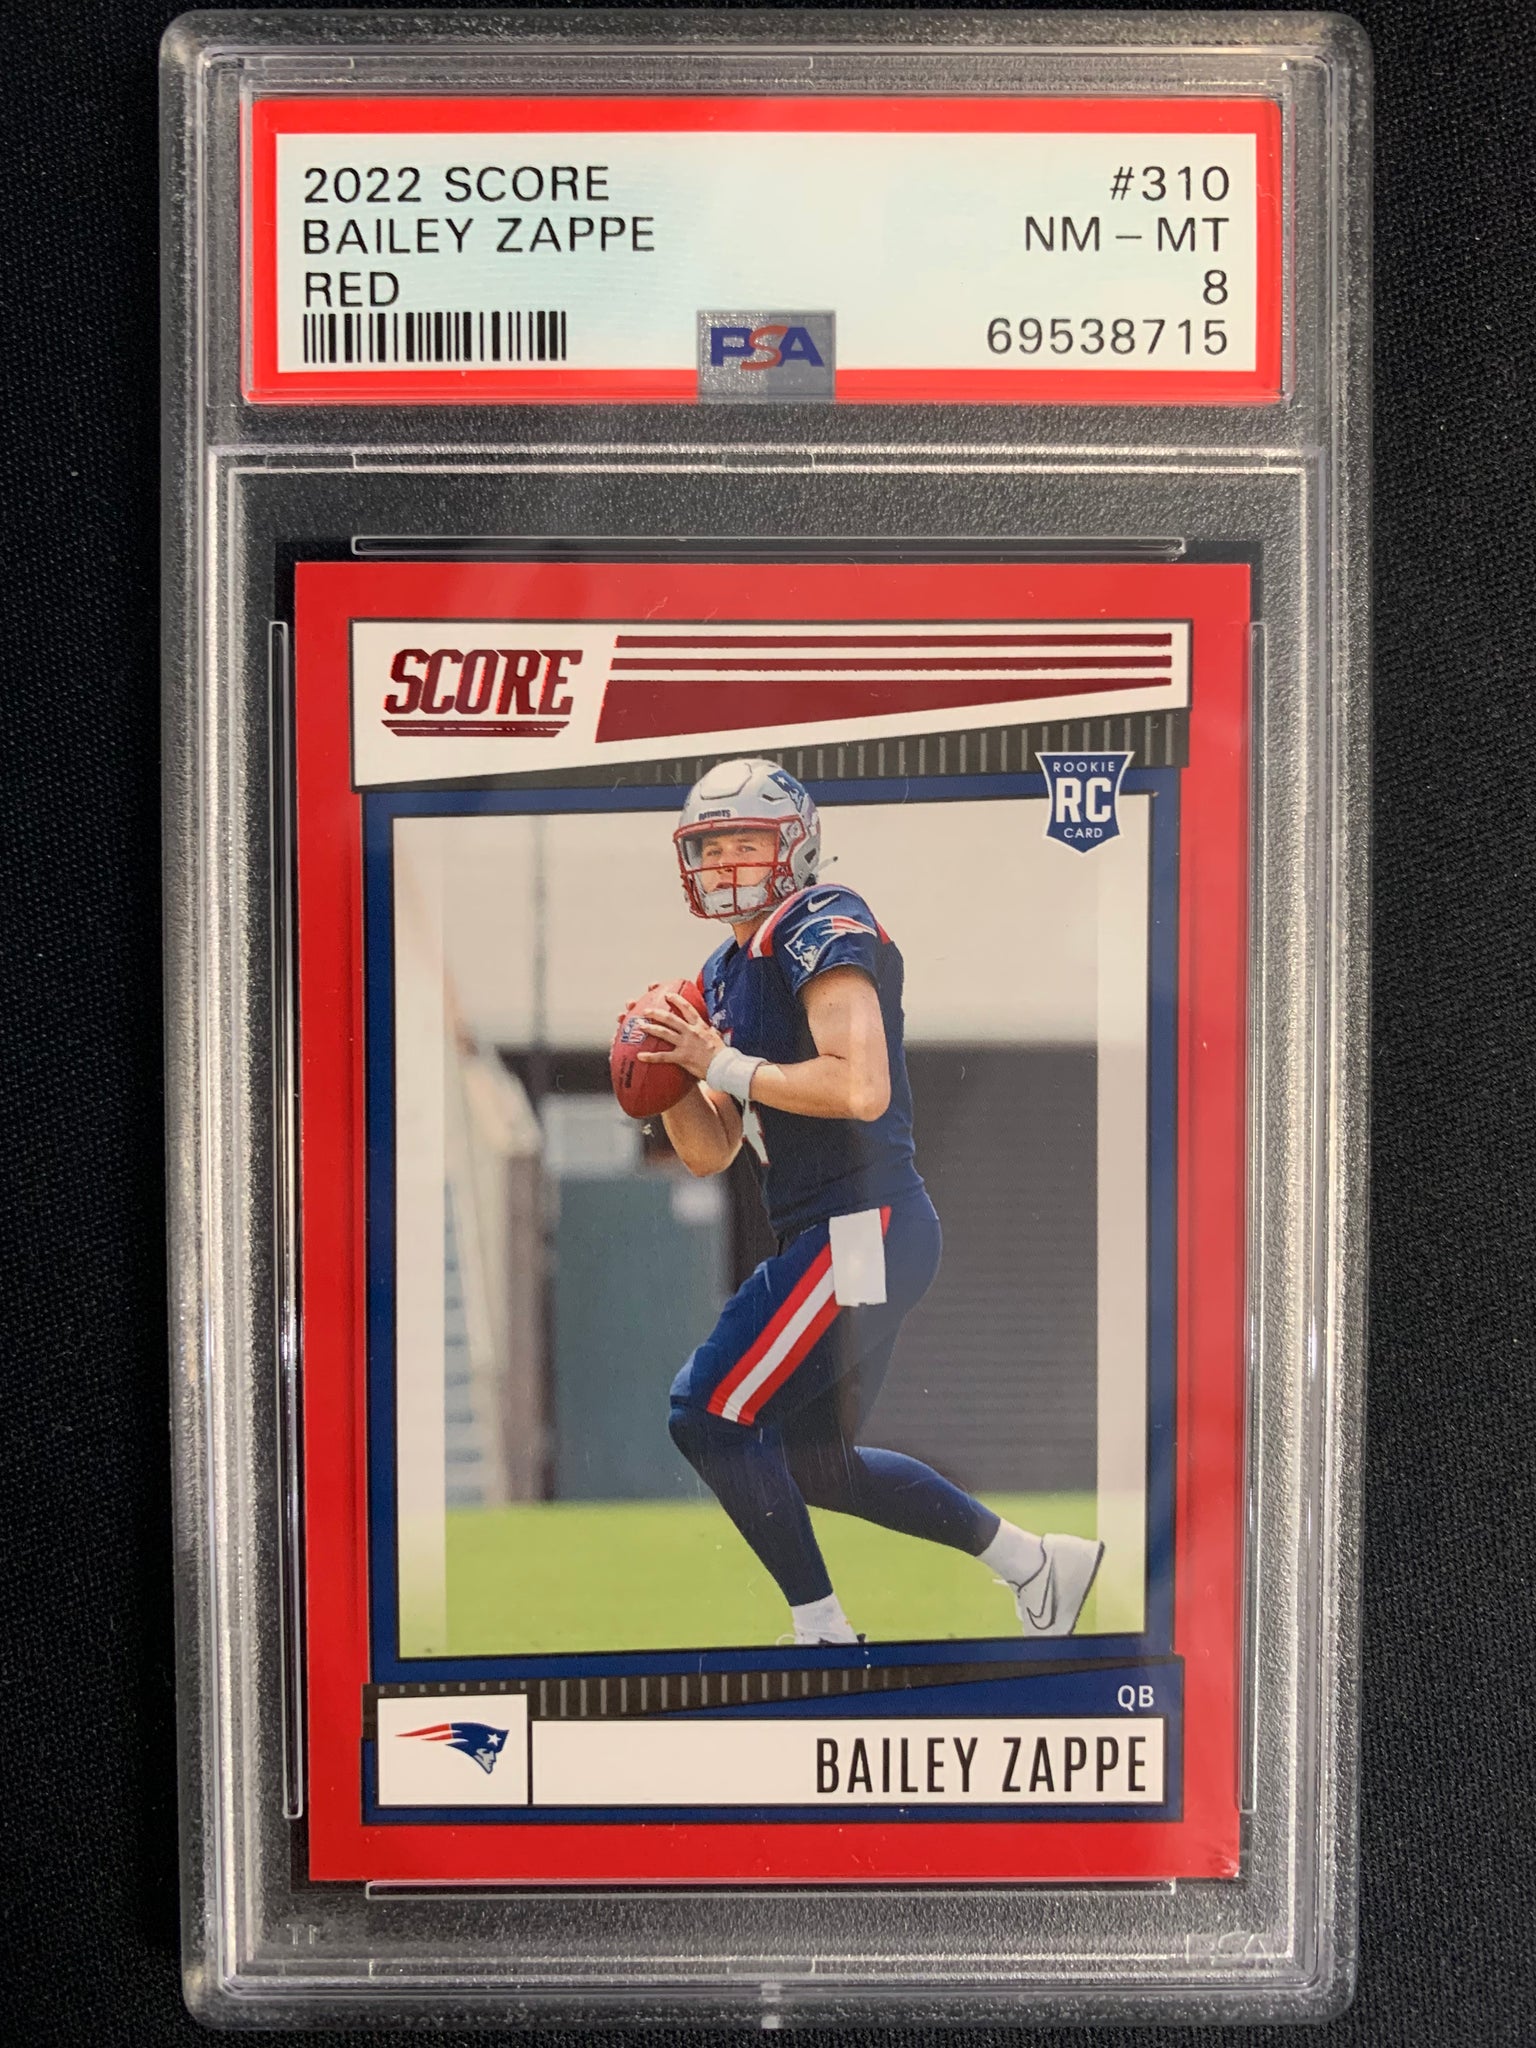 2022 PANINI SCORE FOOTBALL #310 NEW ENGLAND PATRIOTS - BAILEY ZAPPE RED ROOKIE GRADED PSA 8 NM-MT